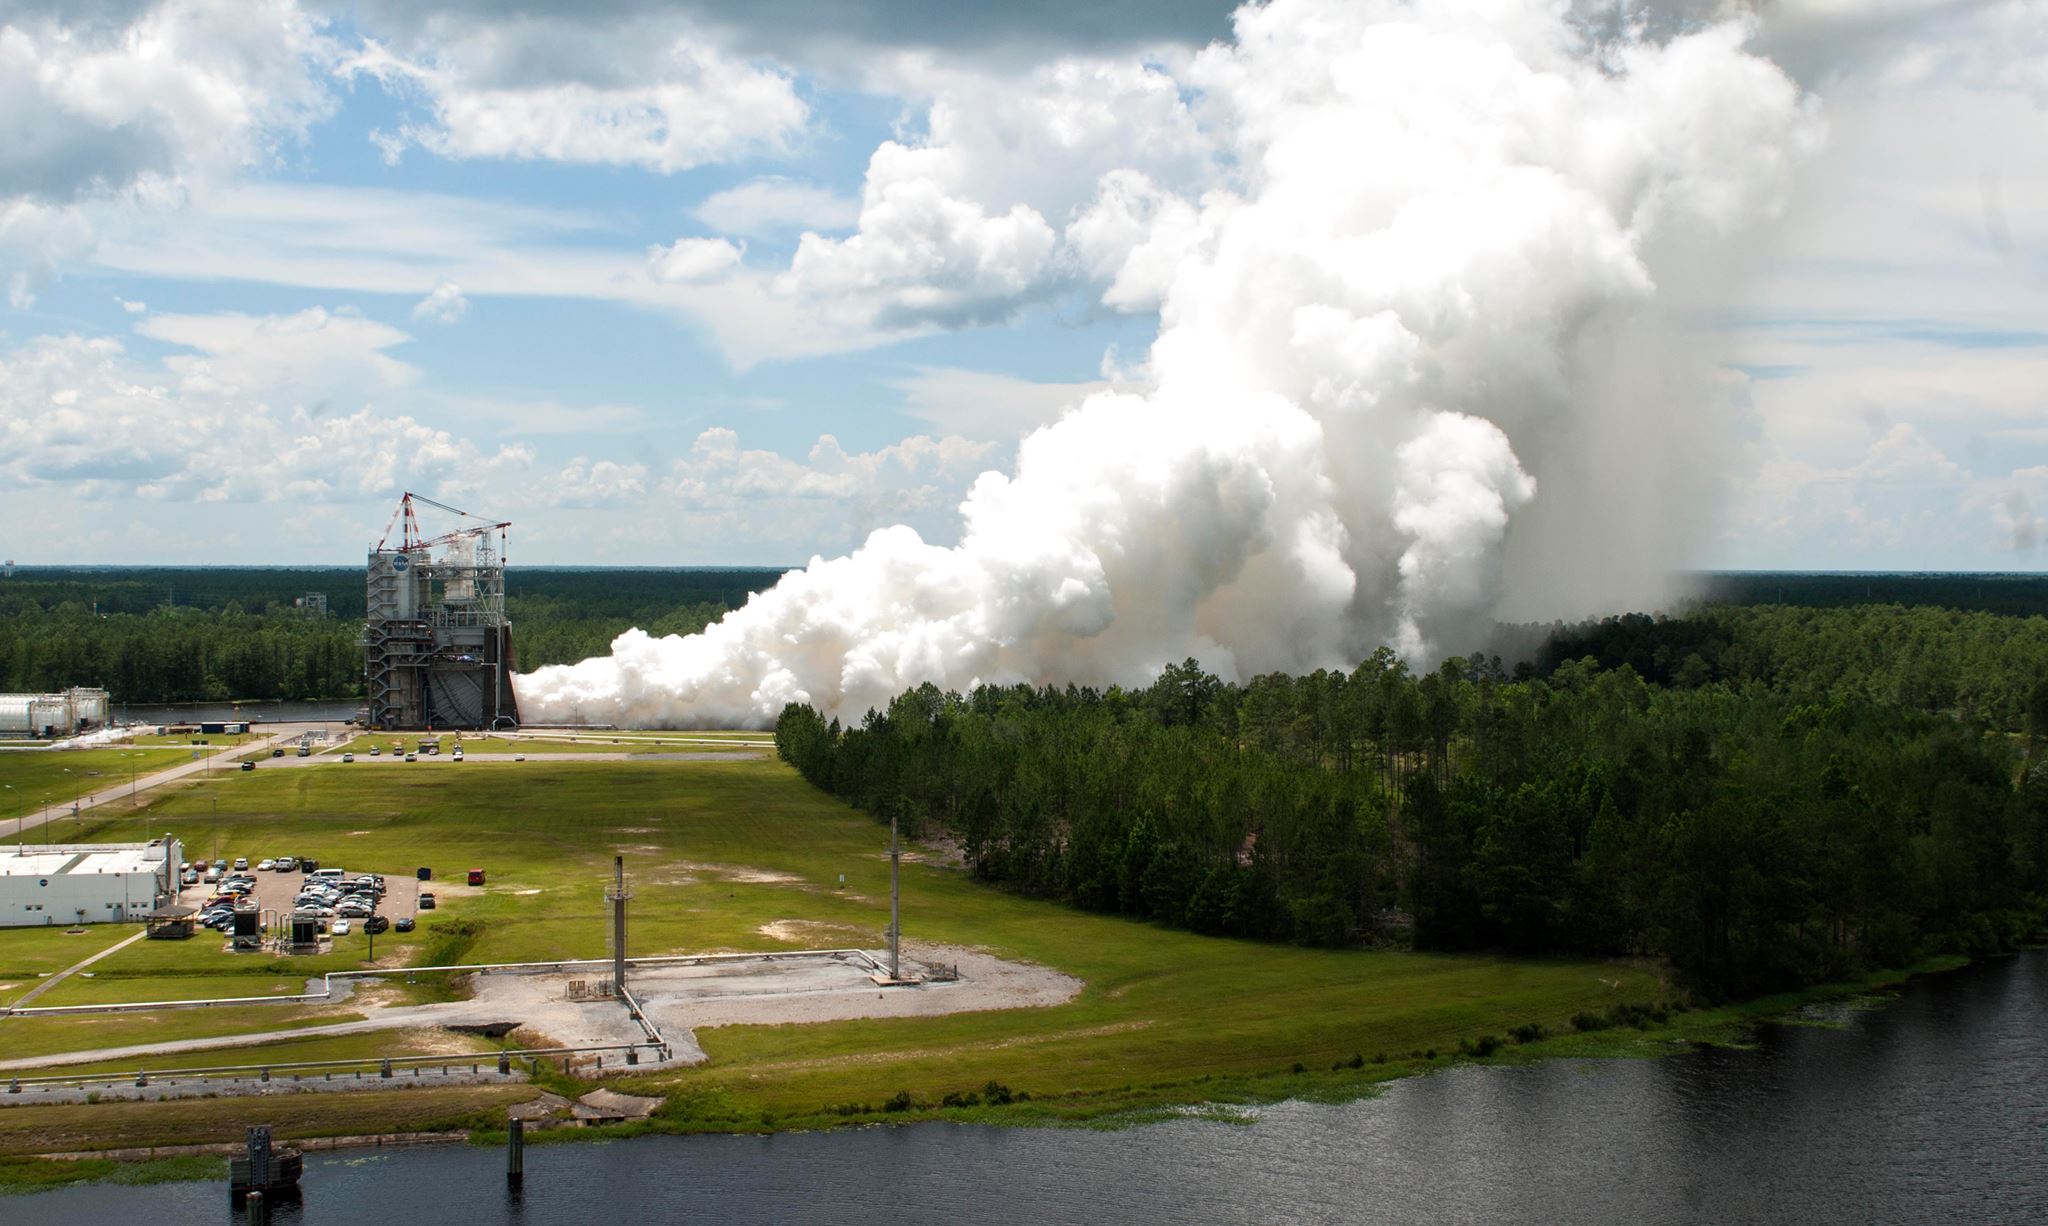 RS-25 development engine test fire at Stennis Space Center near Bay St. Louis, Mississippi. Yesterday's test fire, the fourth in the first series of seven planned test fires, ran for 650-seconds, the longest SLS RS-25 test fire yet. Four RS-25 engines will power the core stage of NASA's new rocket, the Space Launch System. Credits: NASA/Stennis